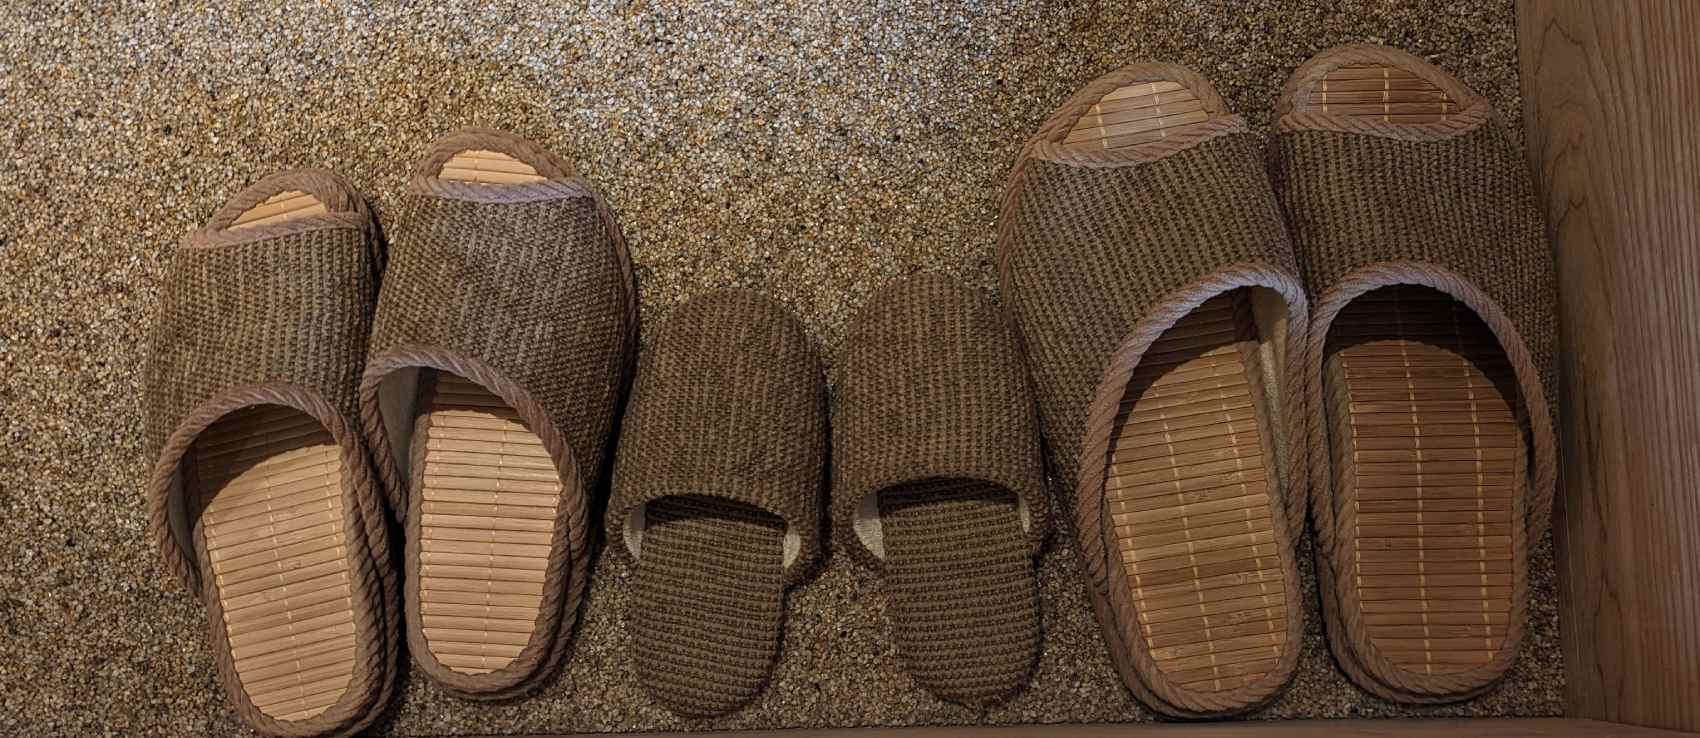 Three pairs of slippers in a row. One for me, a larger one for my husband, and in between a tiny pair for the kid